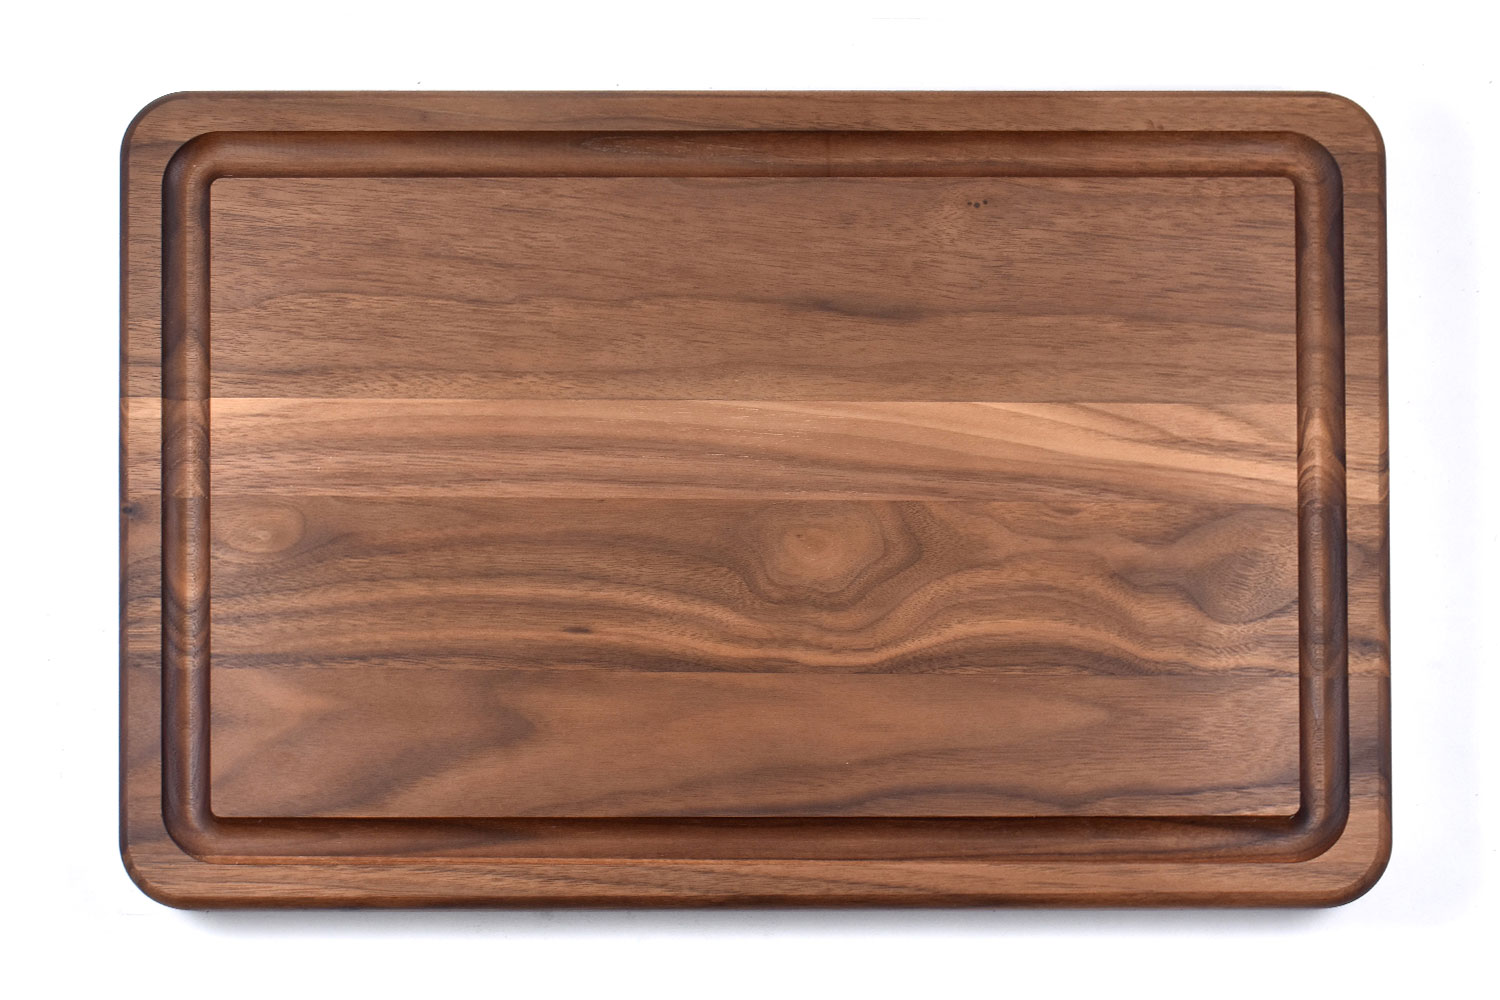 Walnut flat grain butcher board with juice groove 1 1/4" Thick